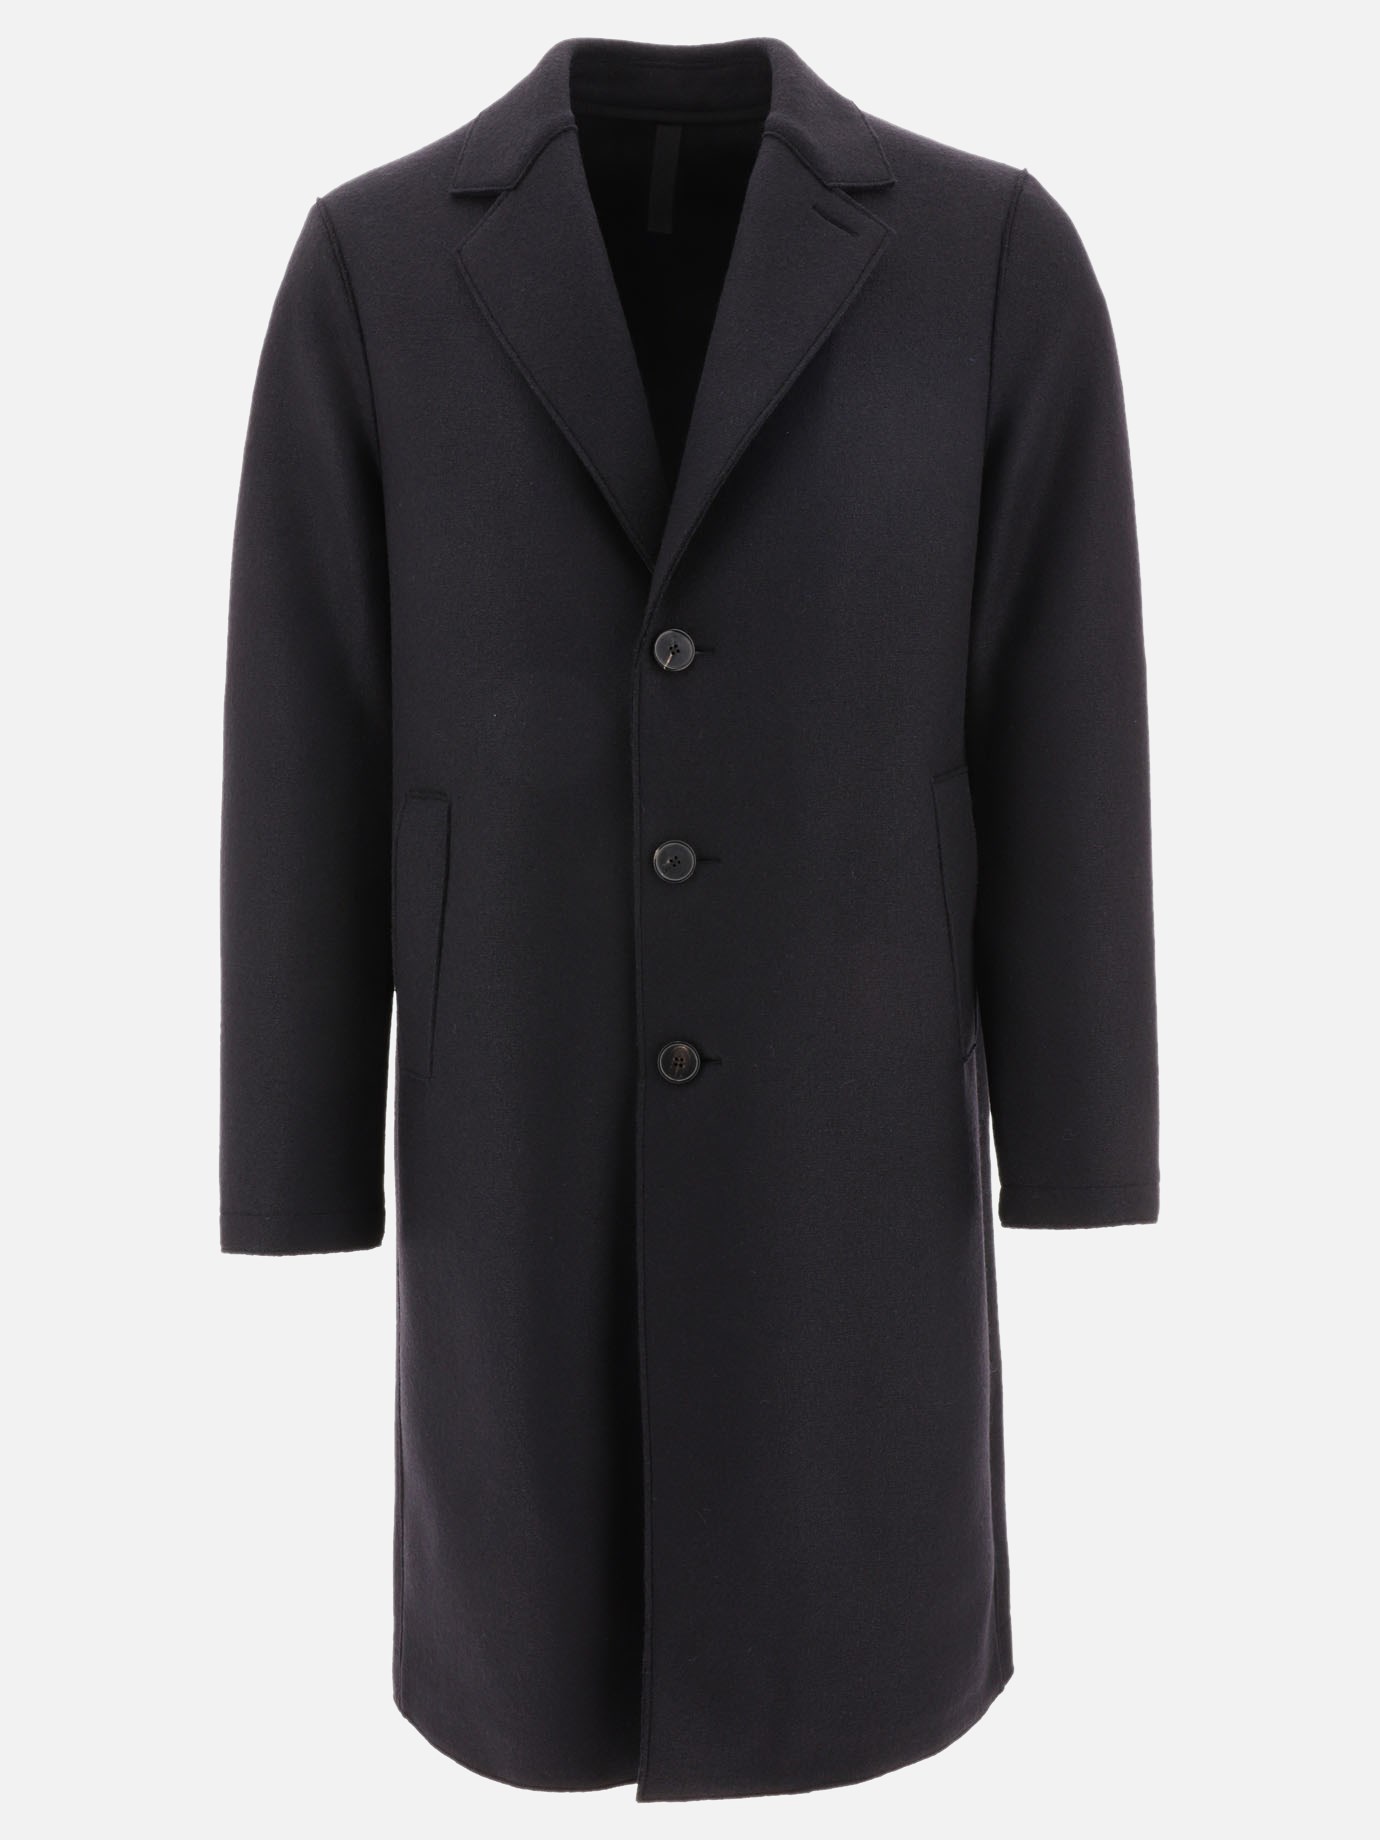 Cappotto  Overcoat by Harris Wharf London - 5